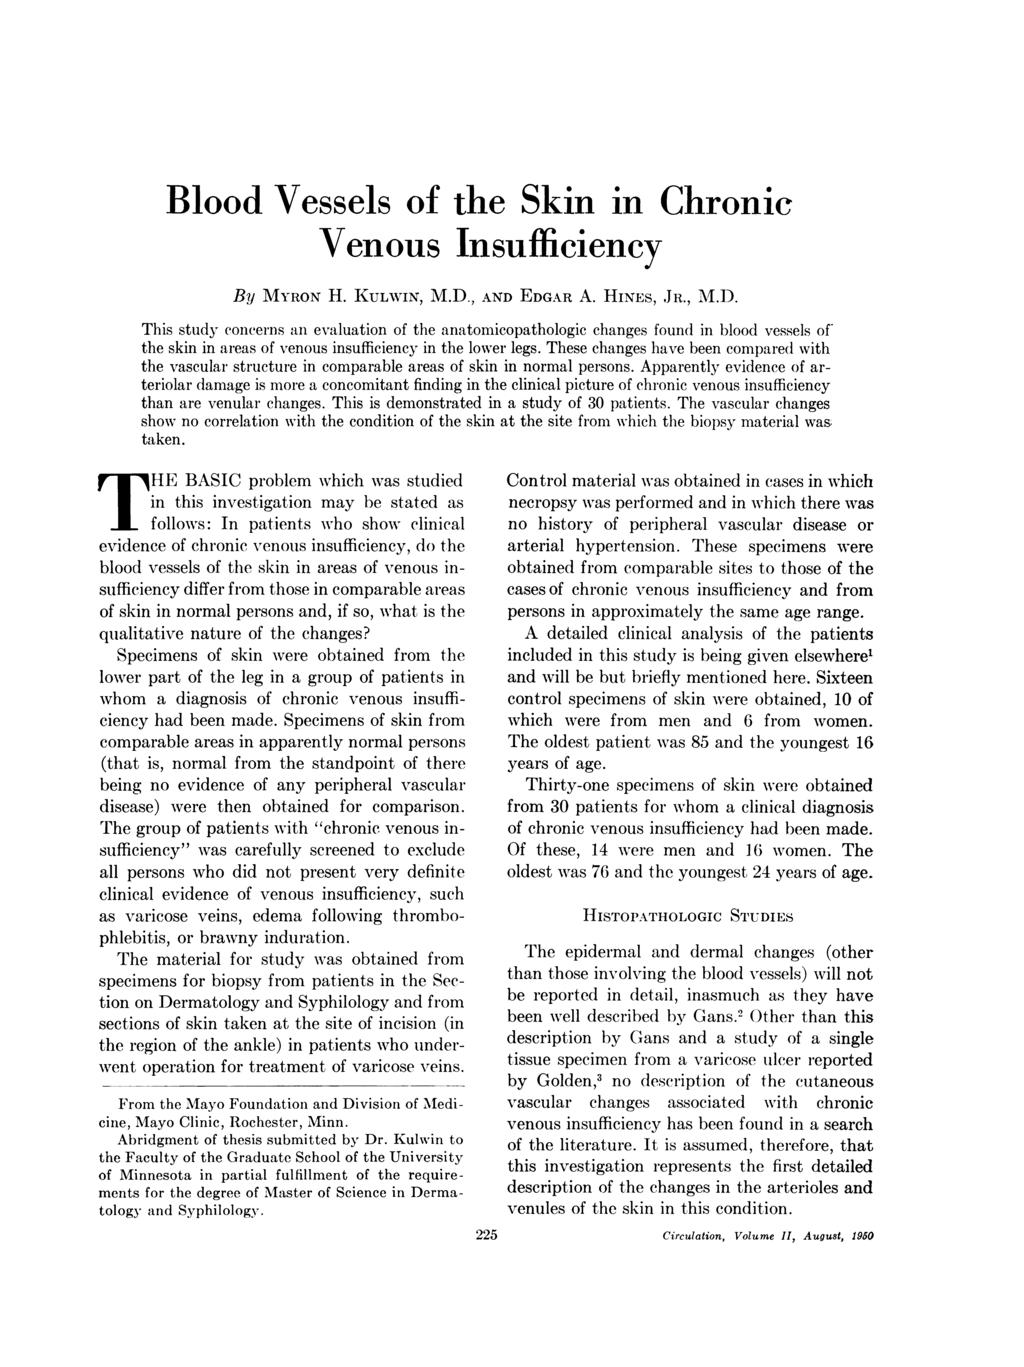 Blood Vessels of the Skin in Chronic Venous Insufficiency By MYRON H. KULWIN, M.D.